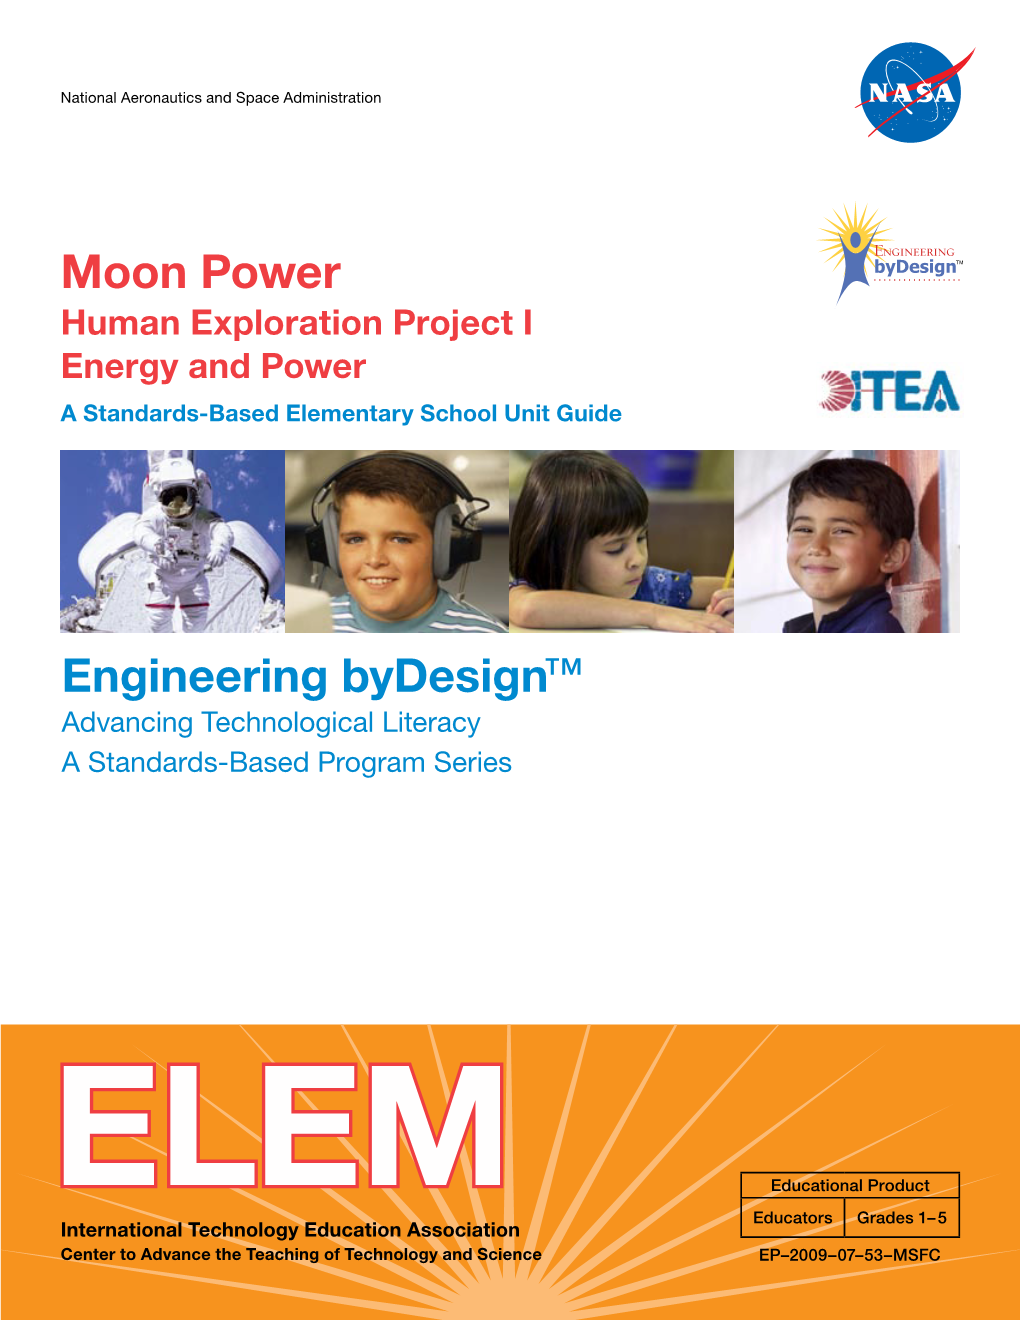 Moon Power Human Exploration Project I Energy and Power a Standards-Based Elementary School Unit Guide